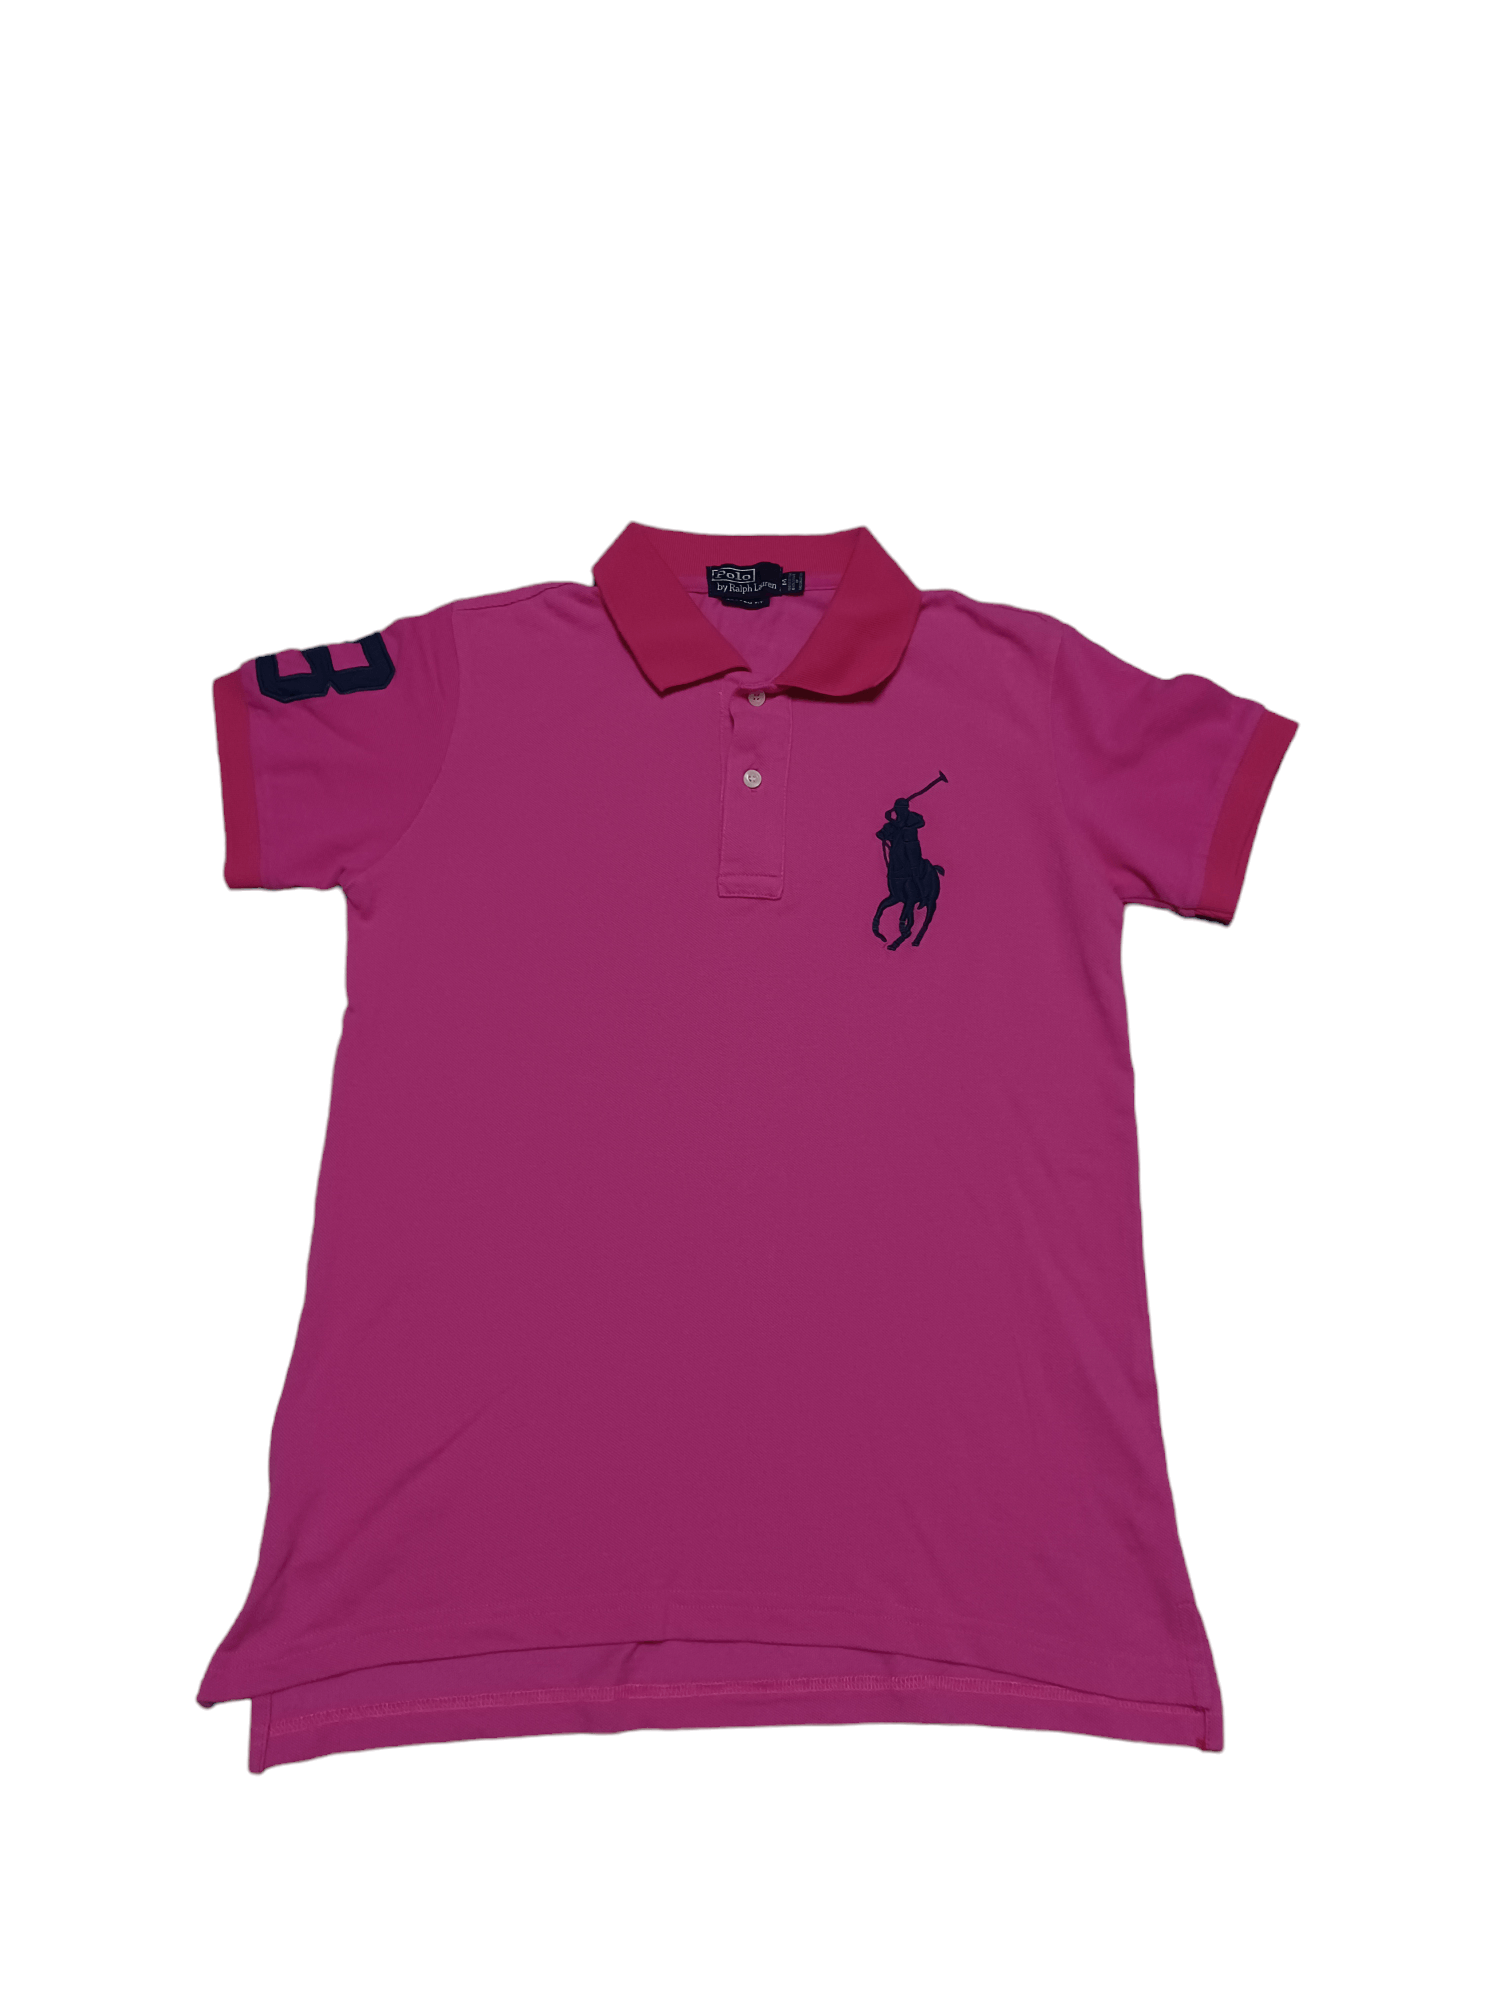 Pre-owned 1990x Clothing X Polo Ralph Lauren Fantastic Pink Vintage Prl 90's Polo Shirt Embroidered Logo (size Medium)